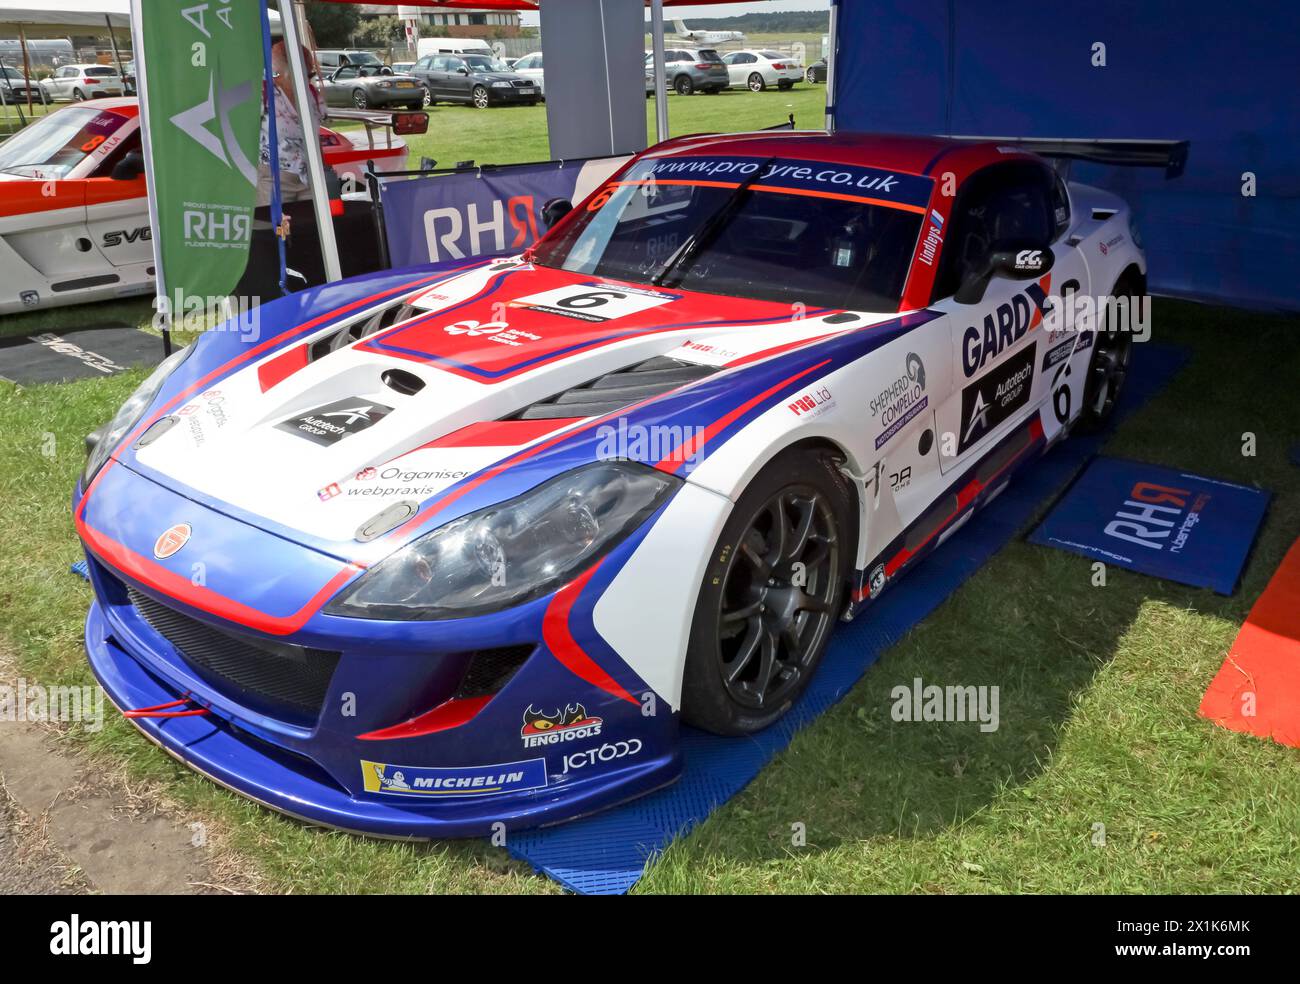 Three-quarters front view of a Ginetta G55,  designed to compete in the Ginetta GT Supercup race series, on display at the 2023 British Motor Show Stock Photo